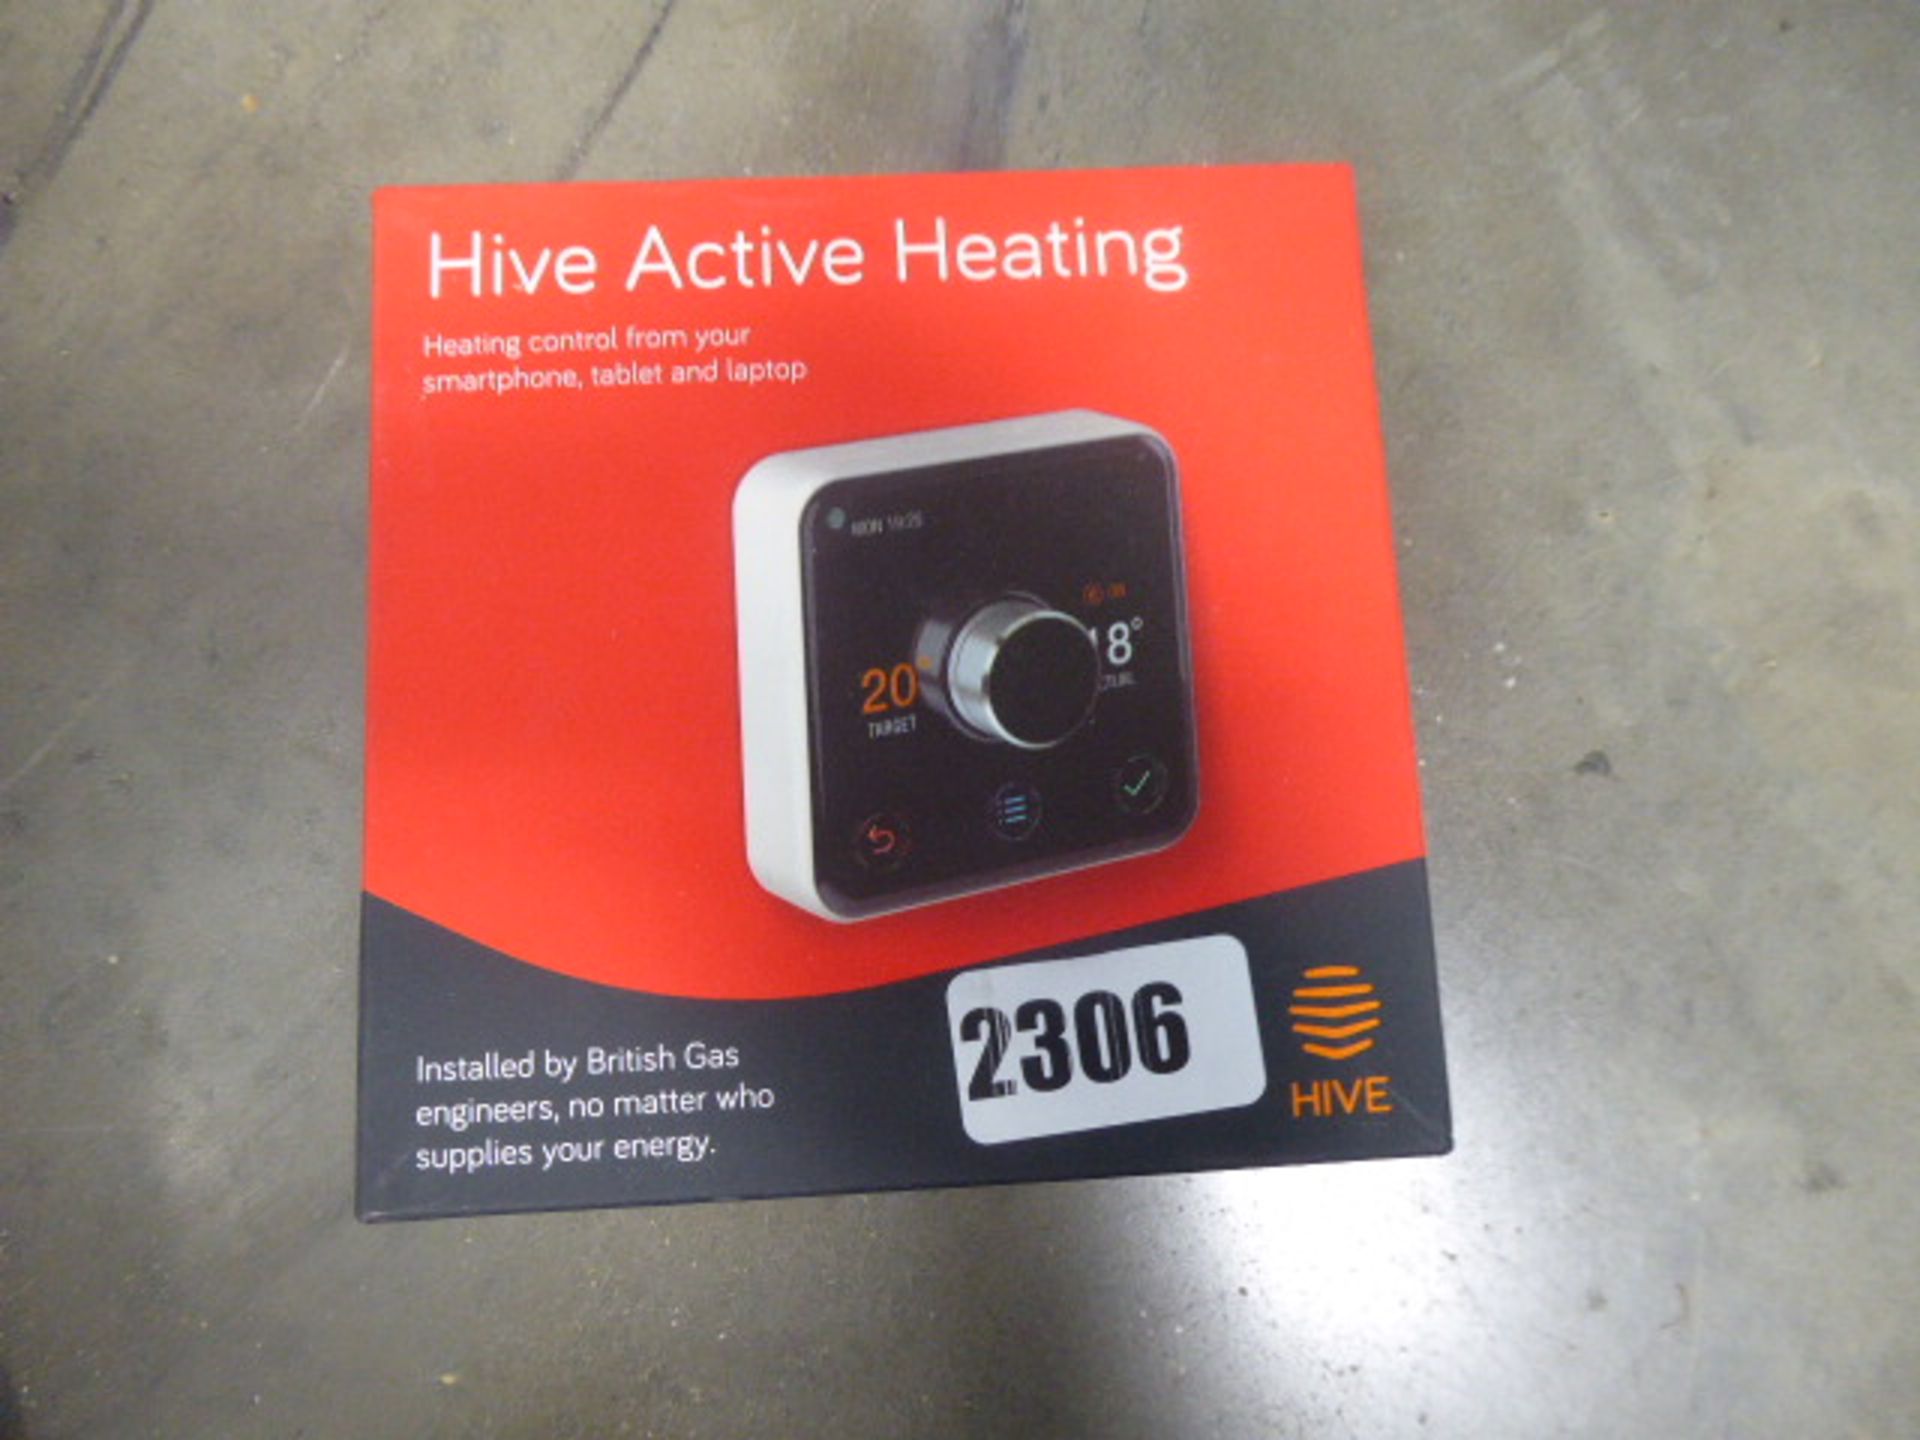 Hive Active Heating control unit in box